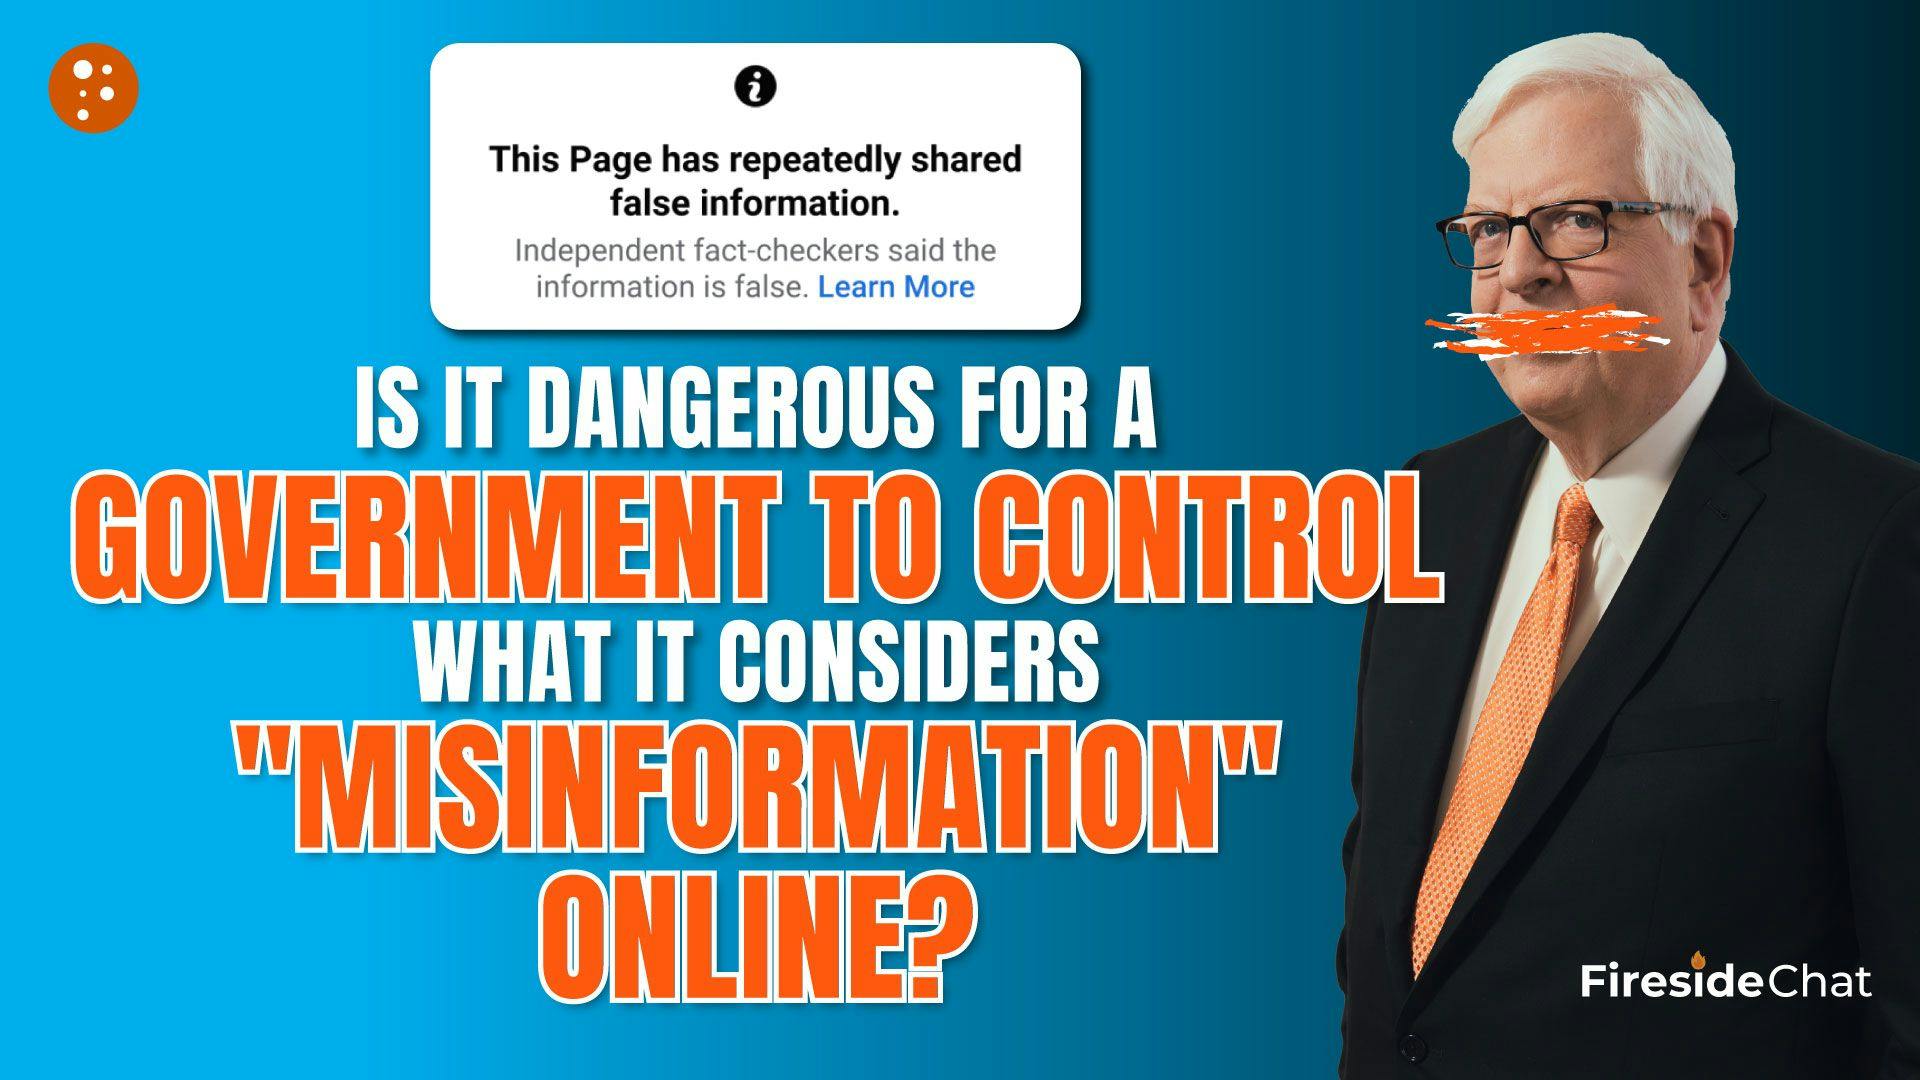 Is It Dangerous for a Government to Control What It Considers "Misinformation” Online?